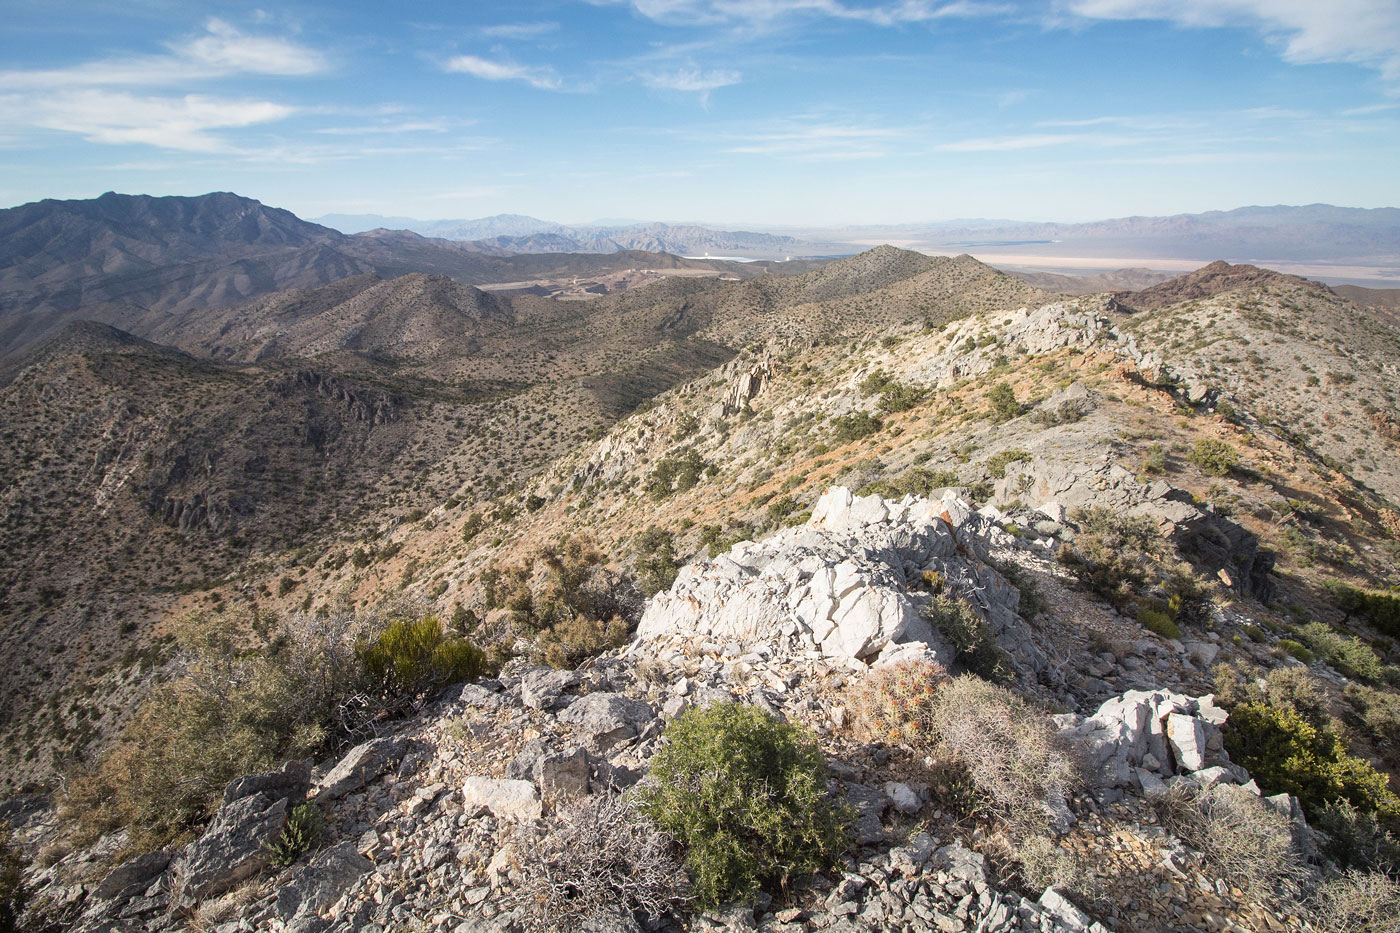 Hike Mescal Range High Point and Climax Peak in Mojave National Preserve, California - Stav is Lost